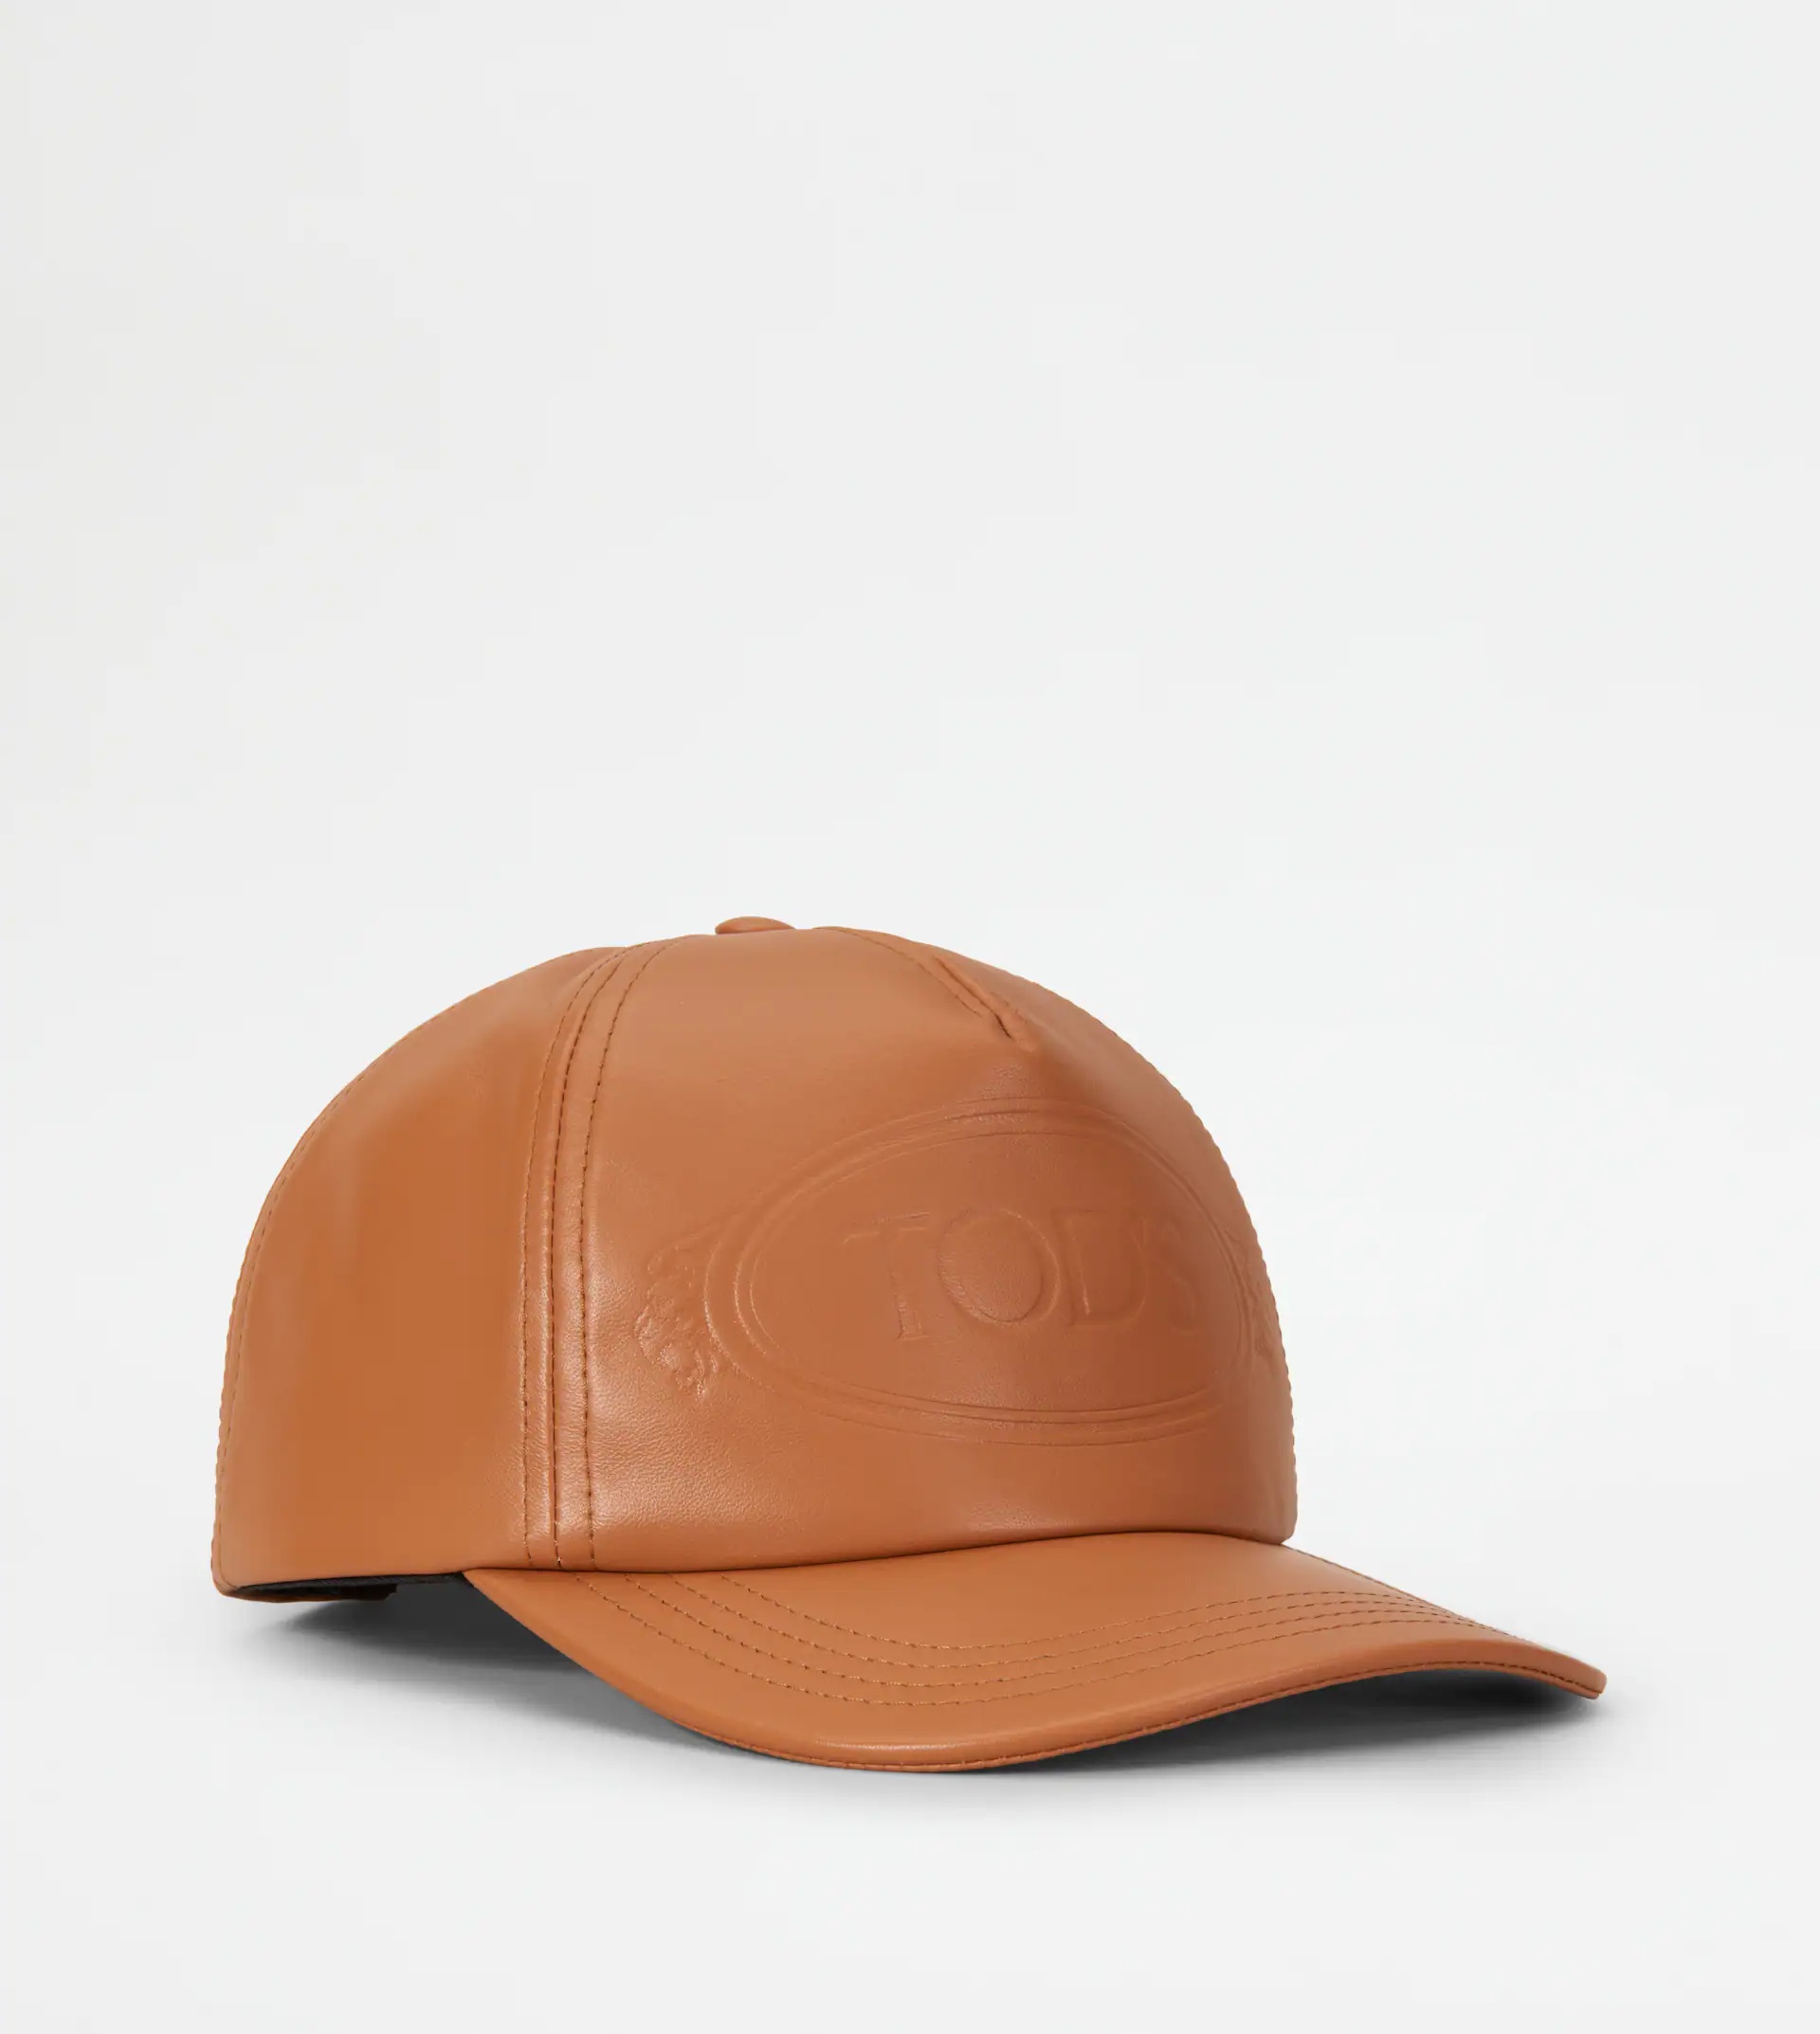 LEATHER CAP - BROWN - 2